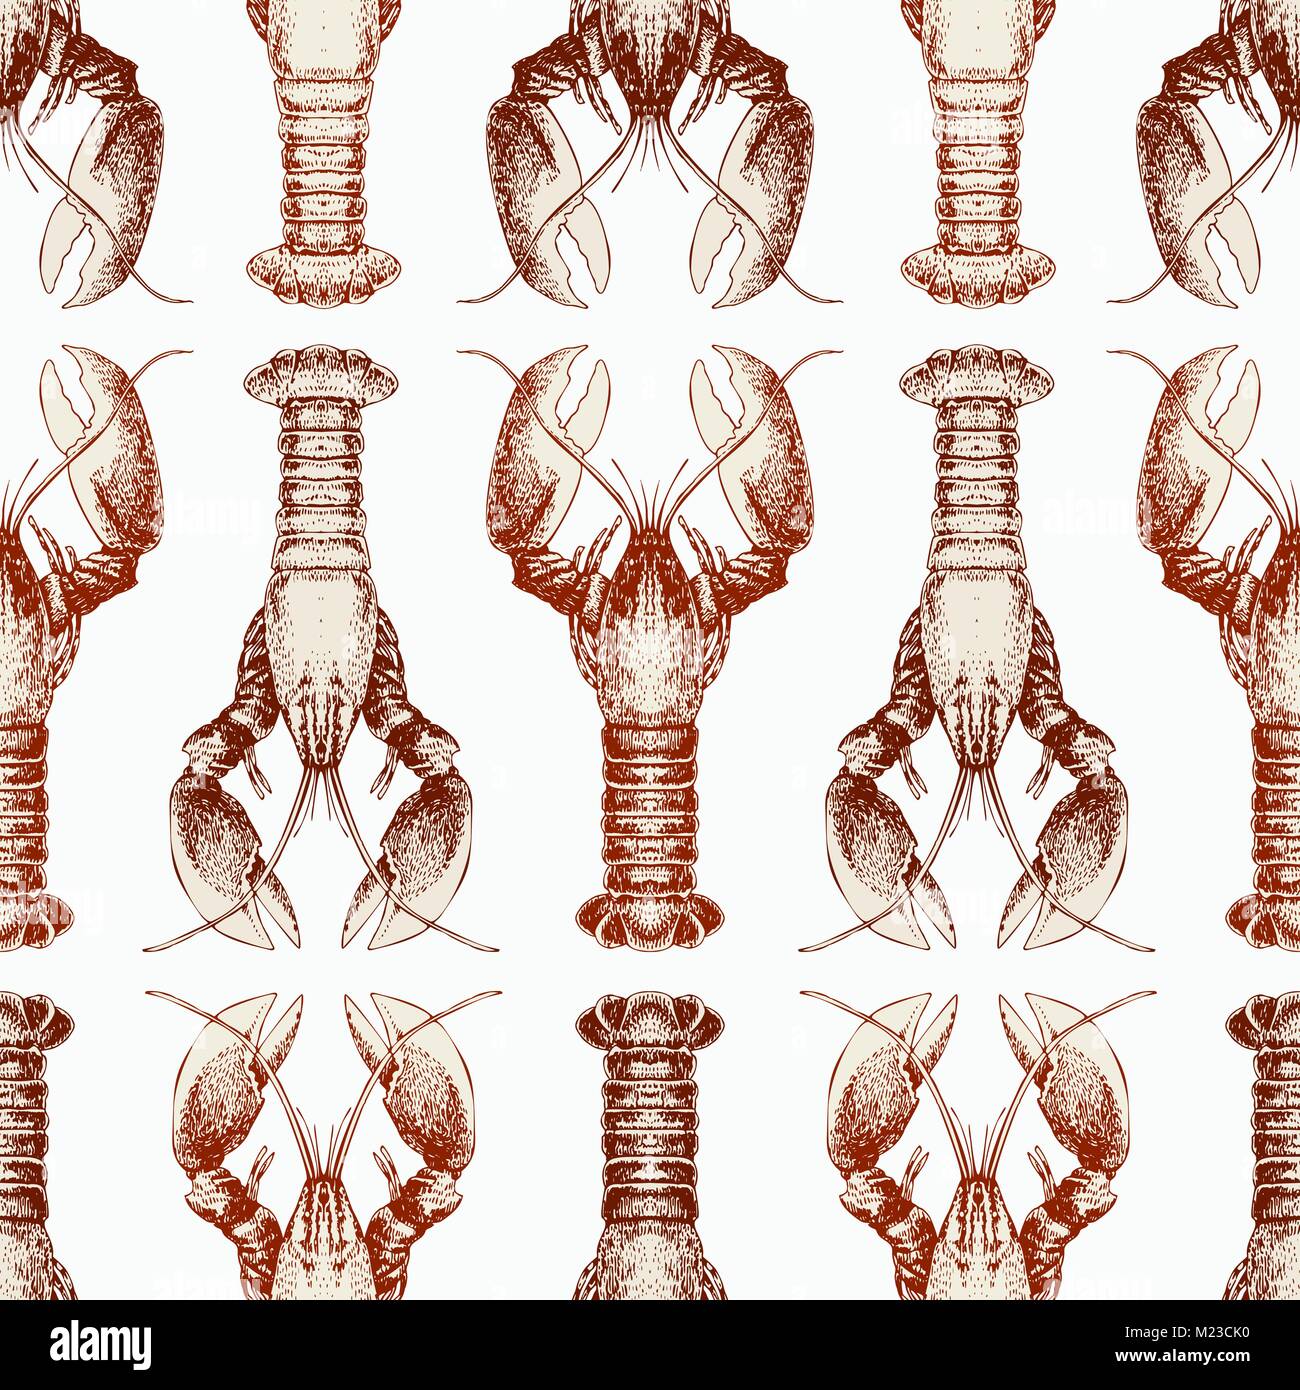 Vector seamless pattern with lobsters. Retro omar lillustration. Hand drawn sketch seafood. Engraved style crayfish, crawfish. Can be use for restaurant menu, kitchen design, paper, wrapping, fabrics. Stock Vector